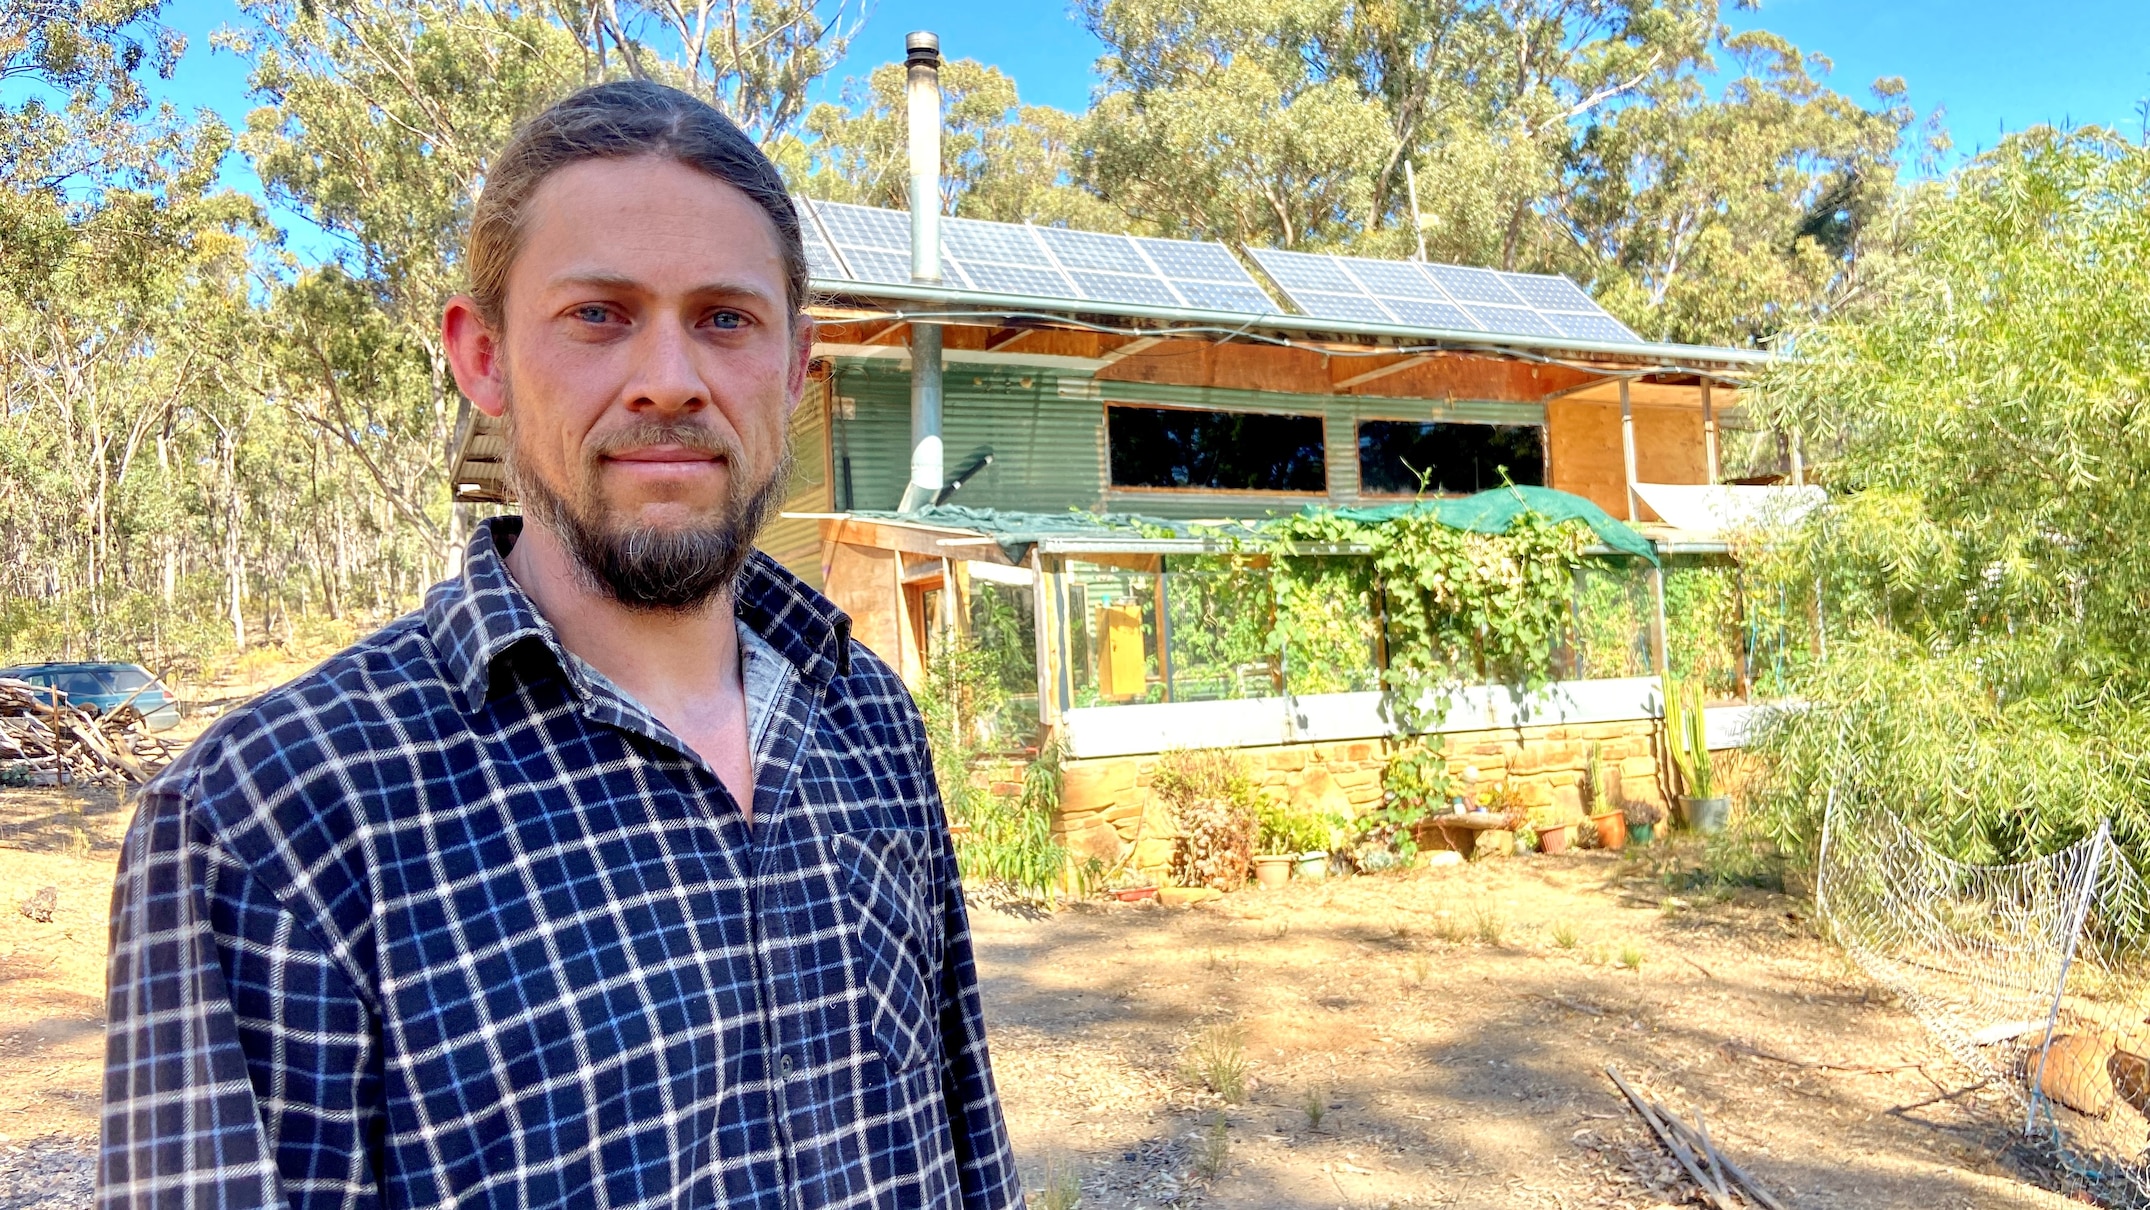 Oliver Holmgren has only had one power outage since he installed his off-grid system in 2017. (ABC Central Victoria: Shannon Schubert)